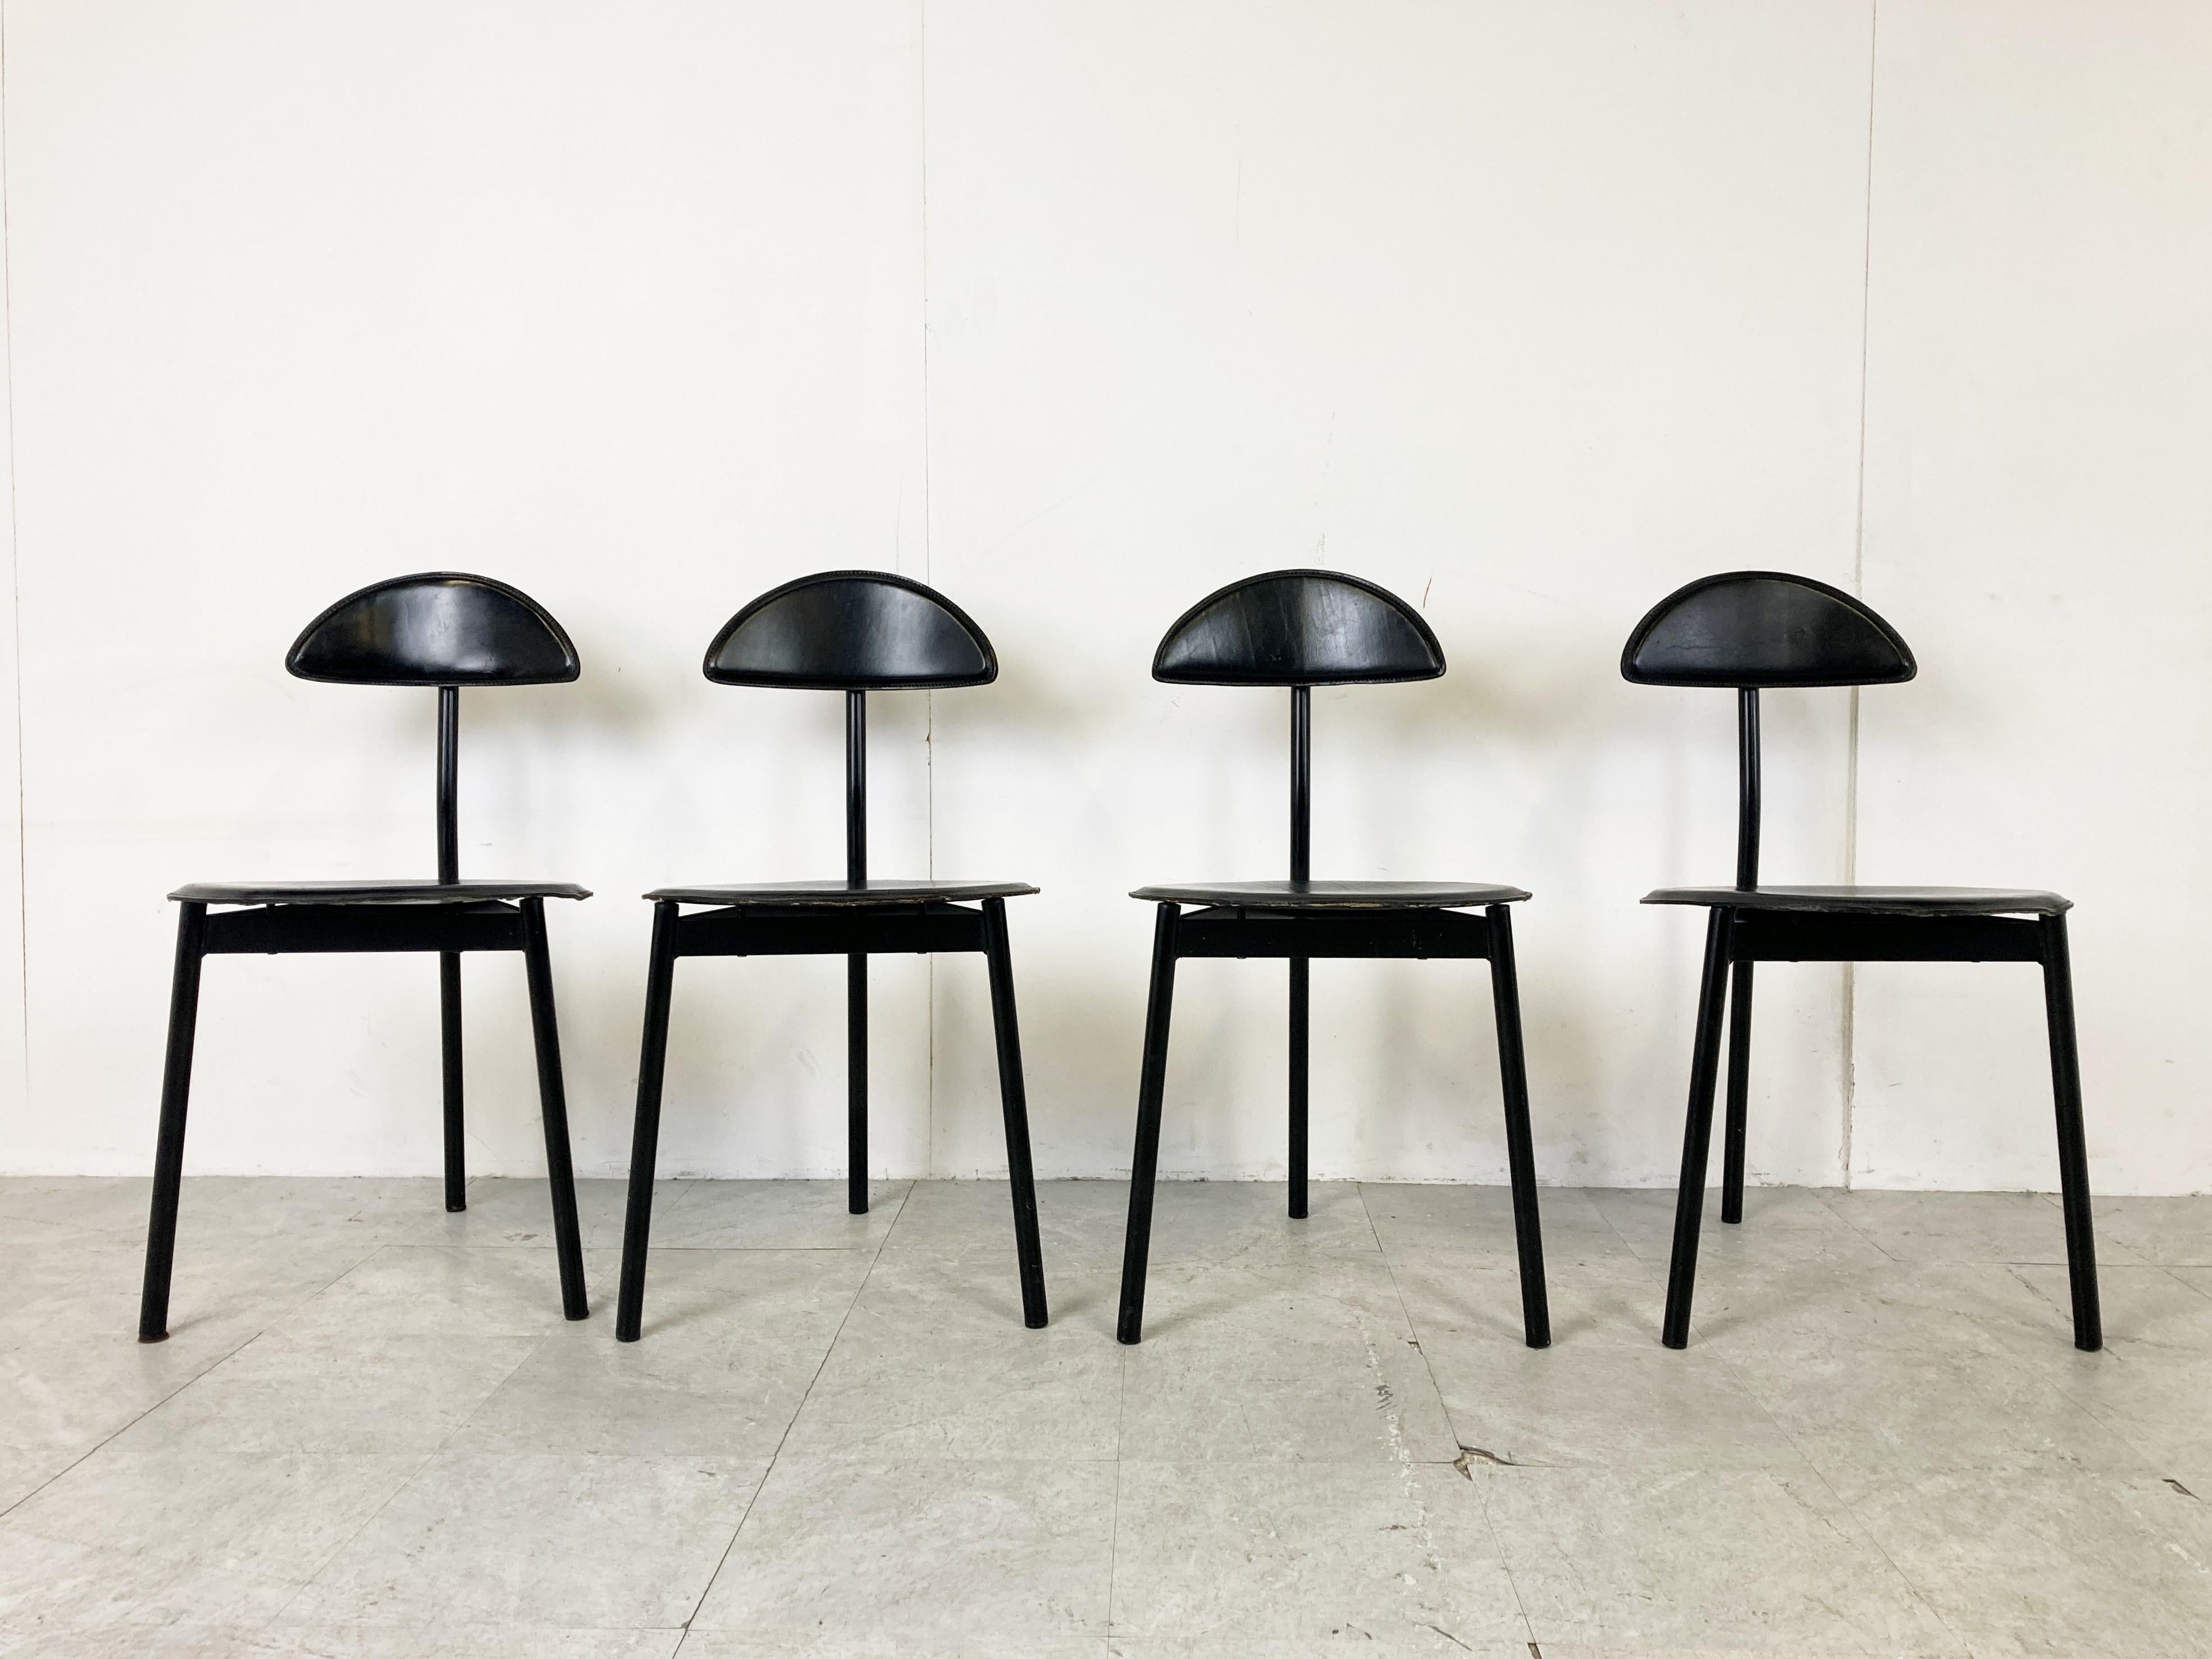 Post-Modern Set of 4 Post Modern Dining Chairs by Linea Veam, 1980s For Sale